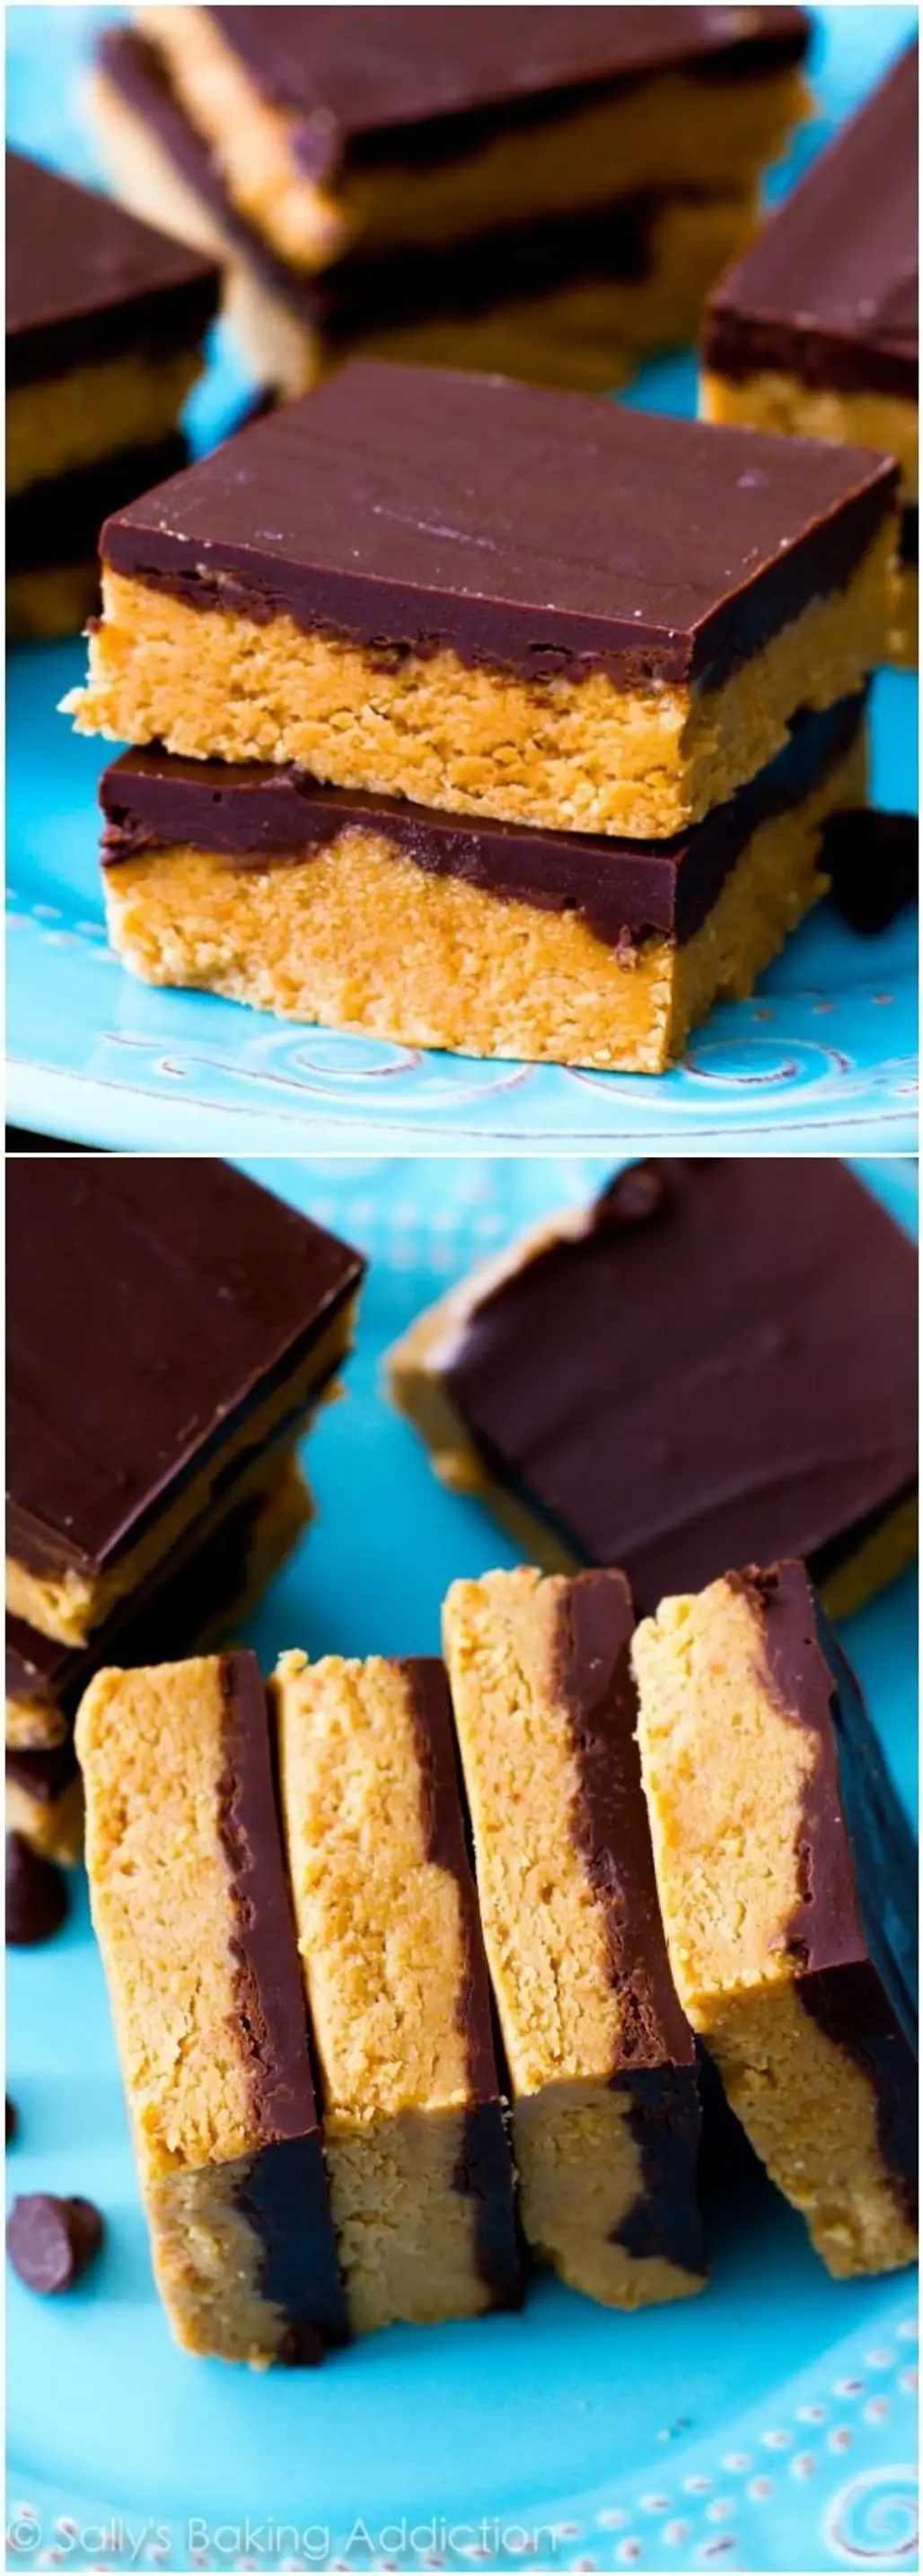 Homemade Chocolate Peanut Butter Cup Bars